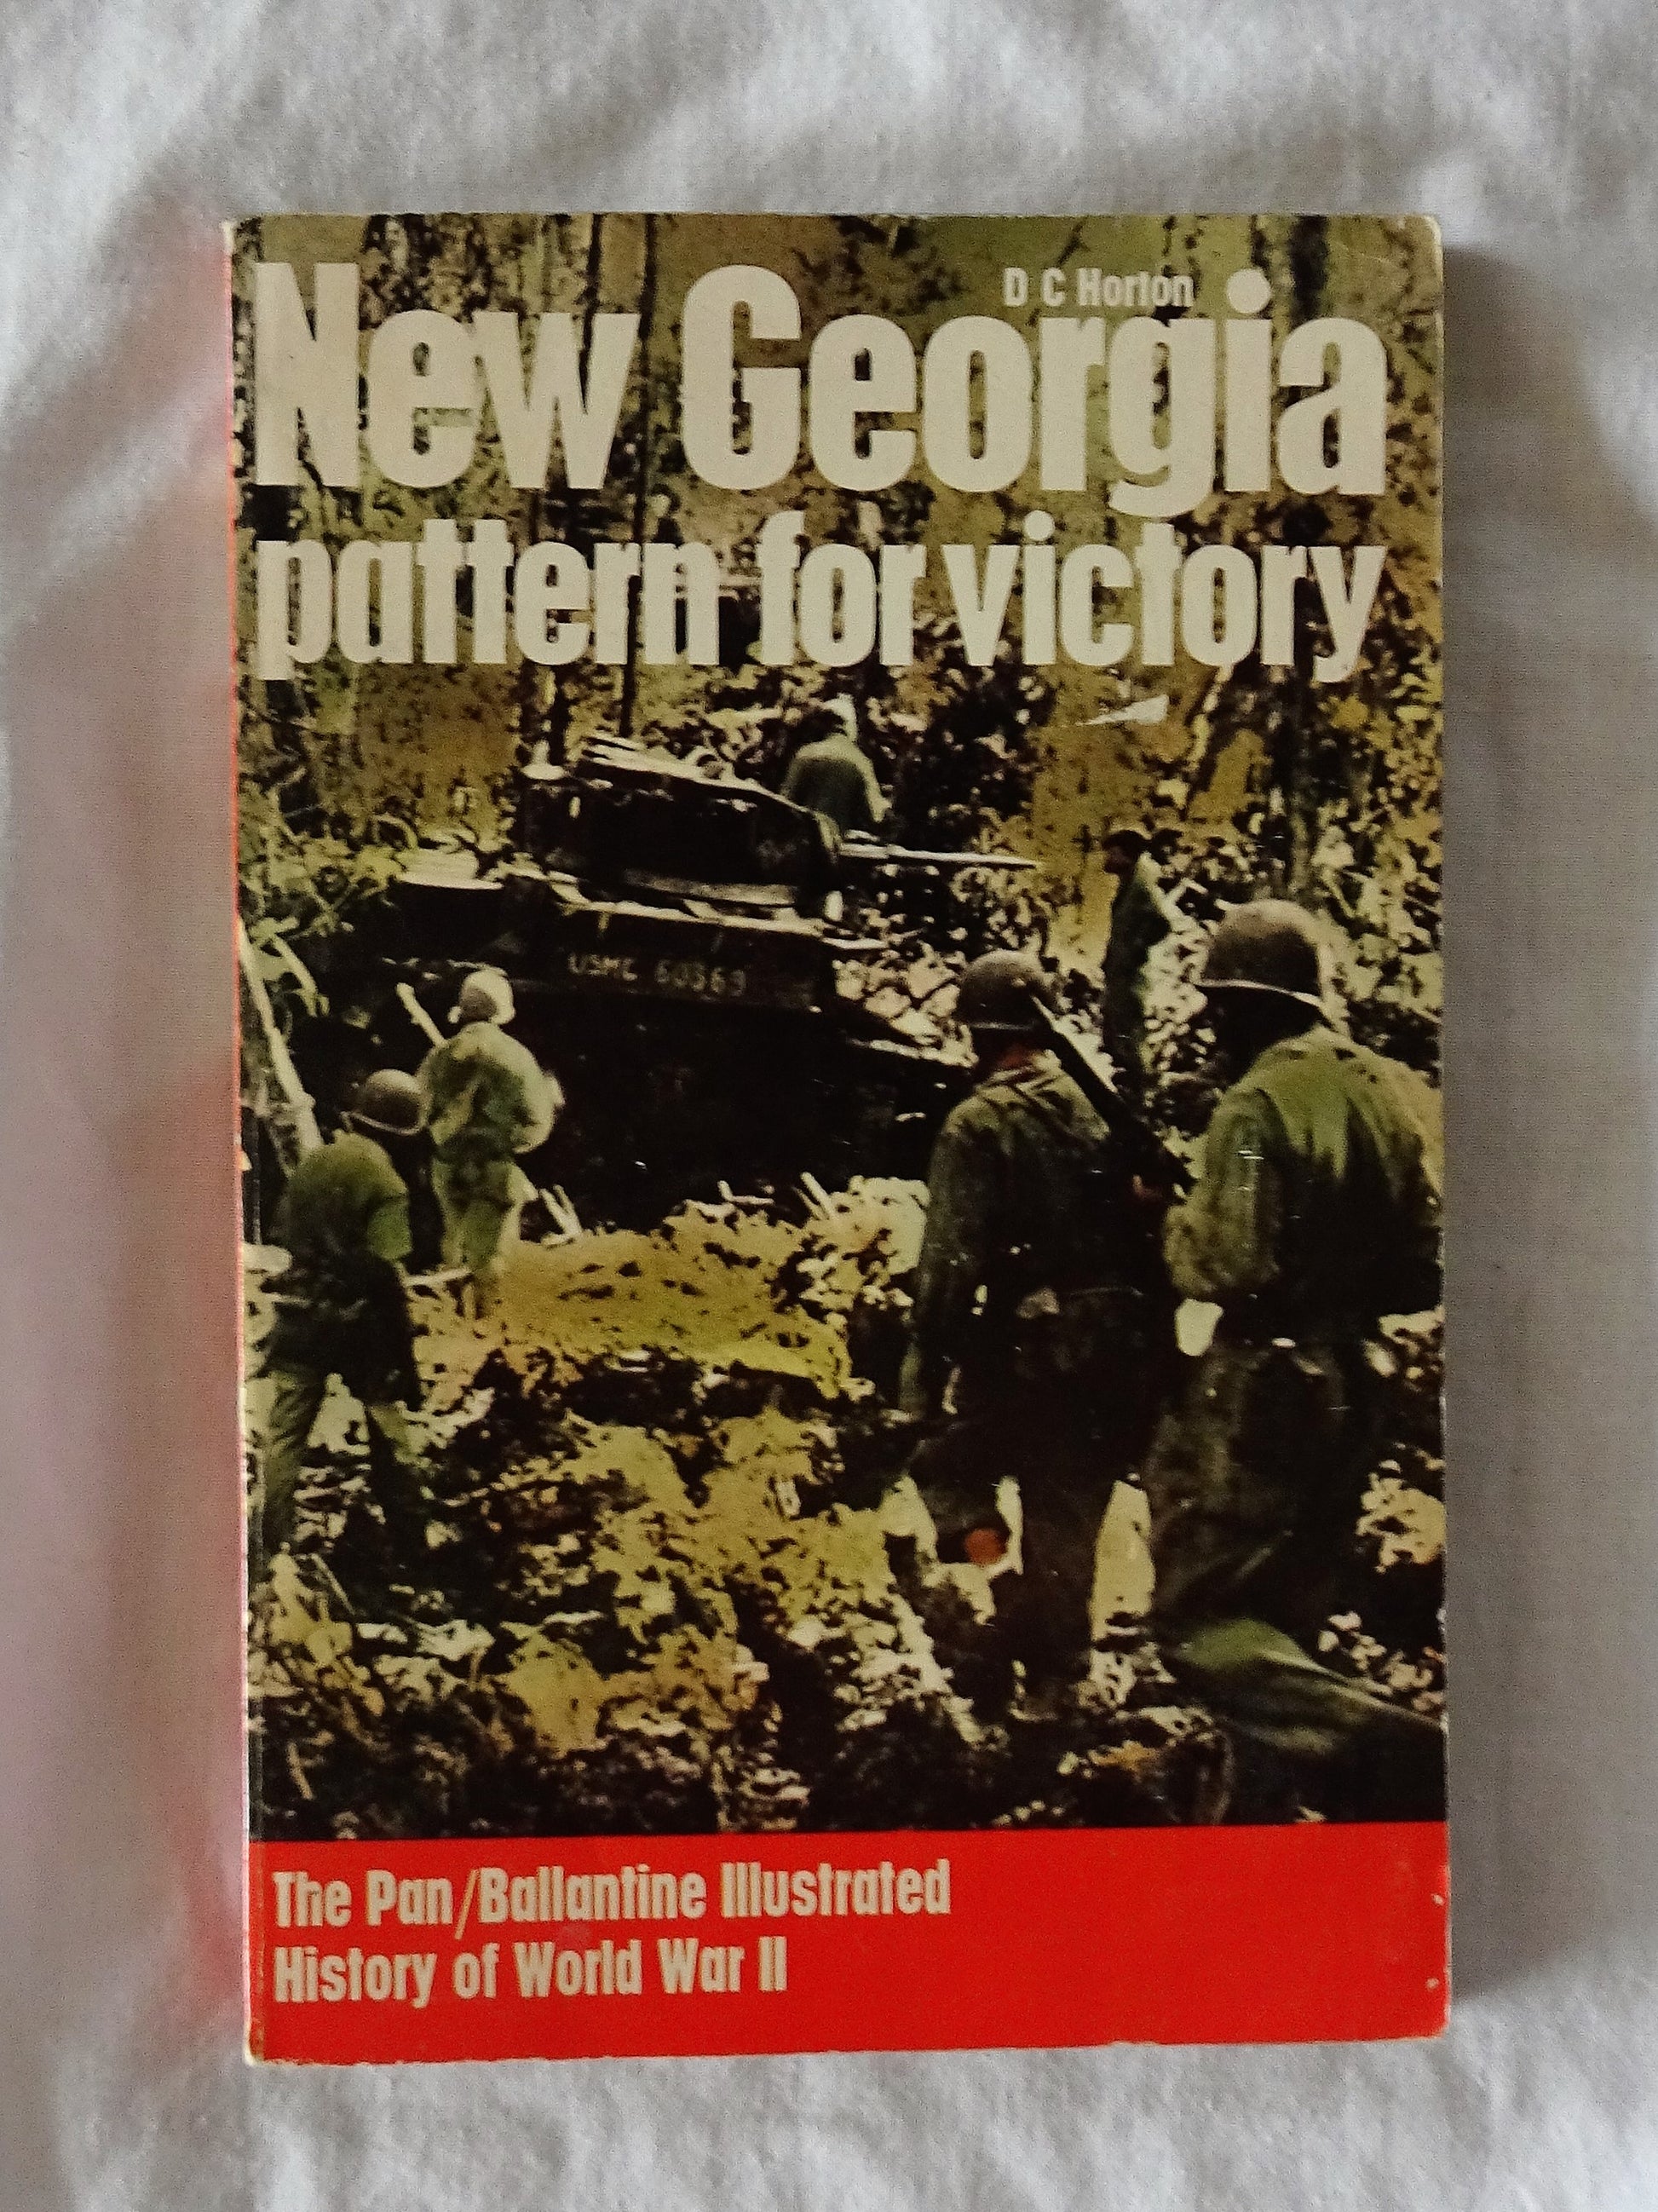 New Georgia  Pattern for Victory  'Illustrated History of World War II'  by D. C. Horton